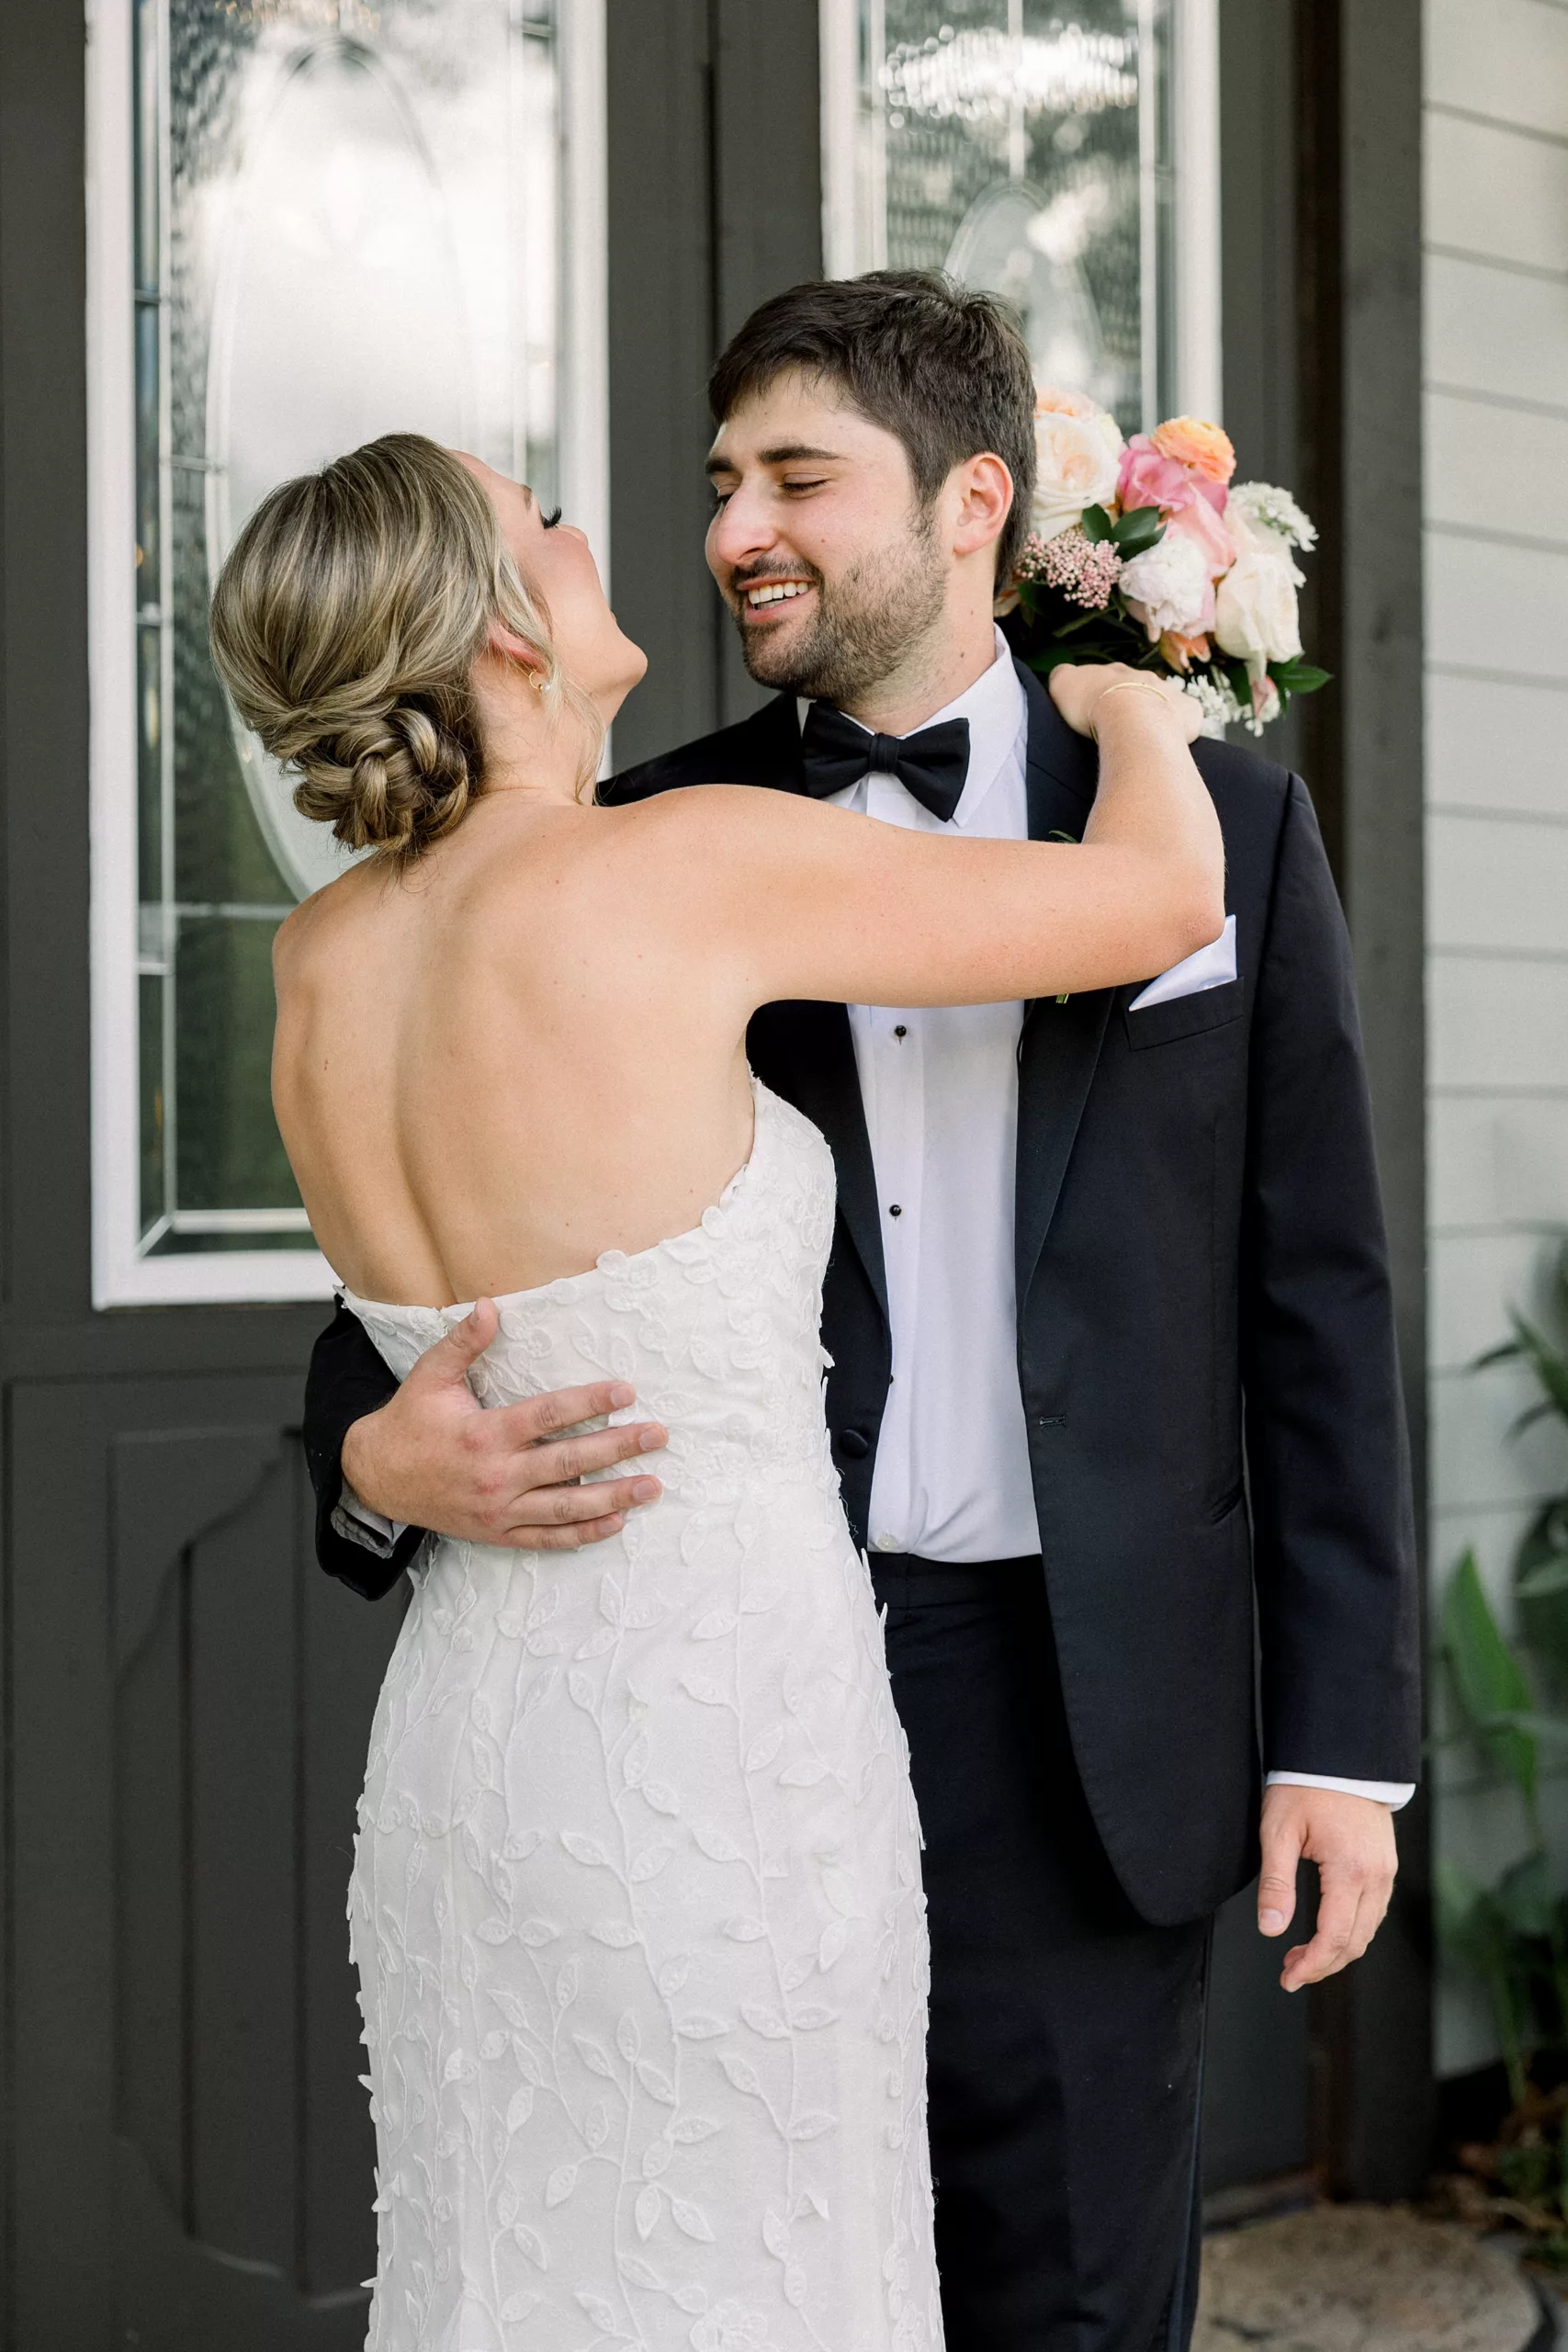 A groom smiles big as he hugs his bride after seeing her for the first time in her dress